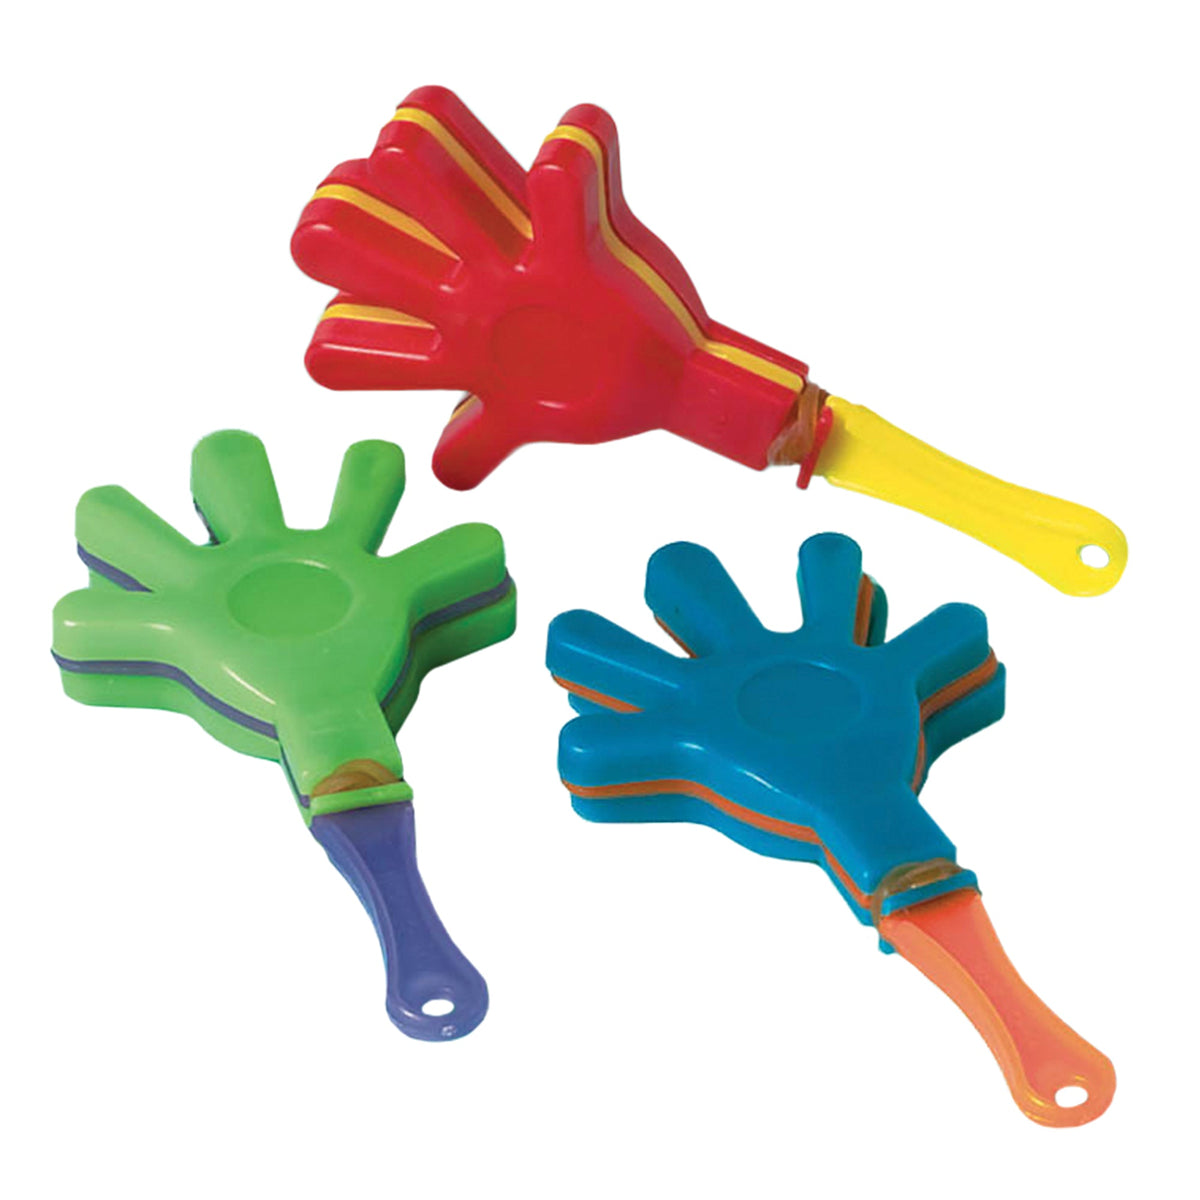 Mini Hand Clappers 3 1/2" x 1 3/4" x 3/8" Party Favors package of 12